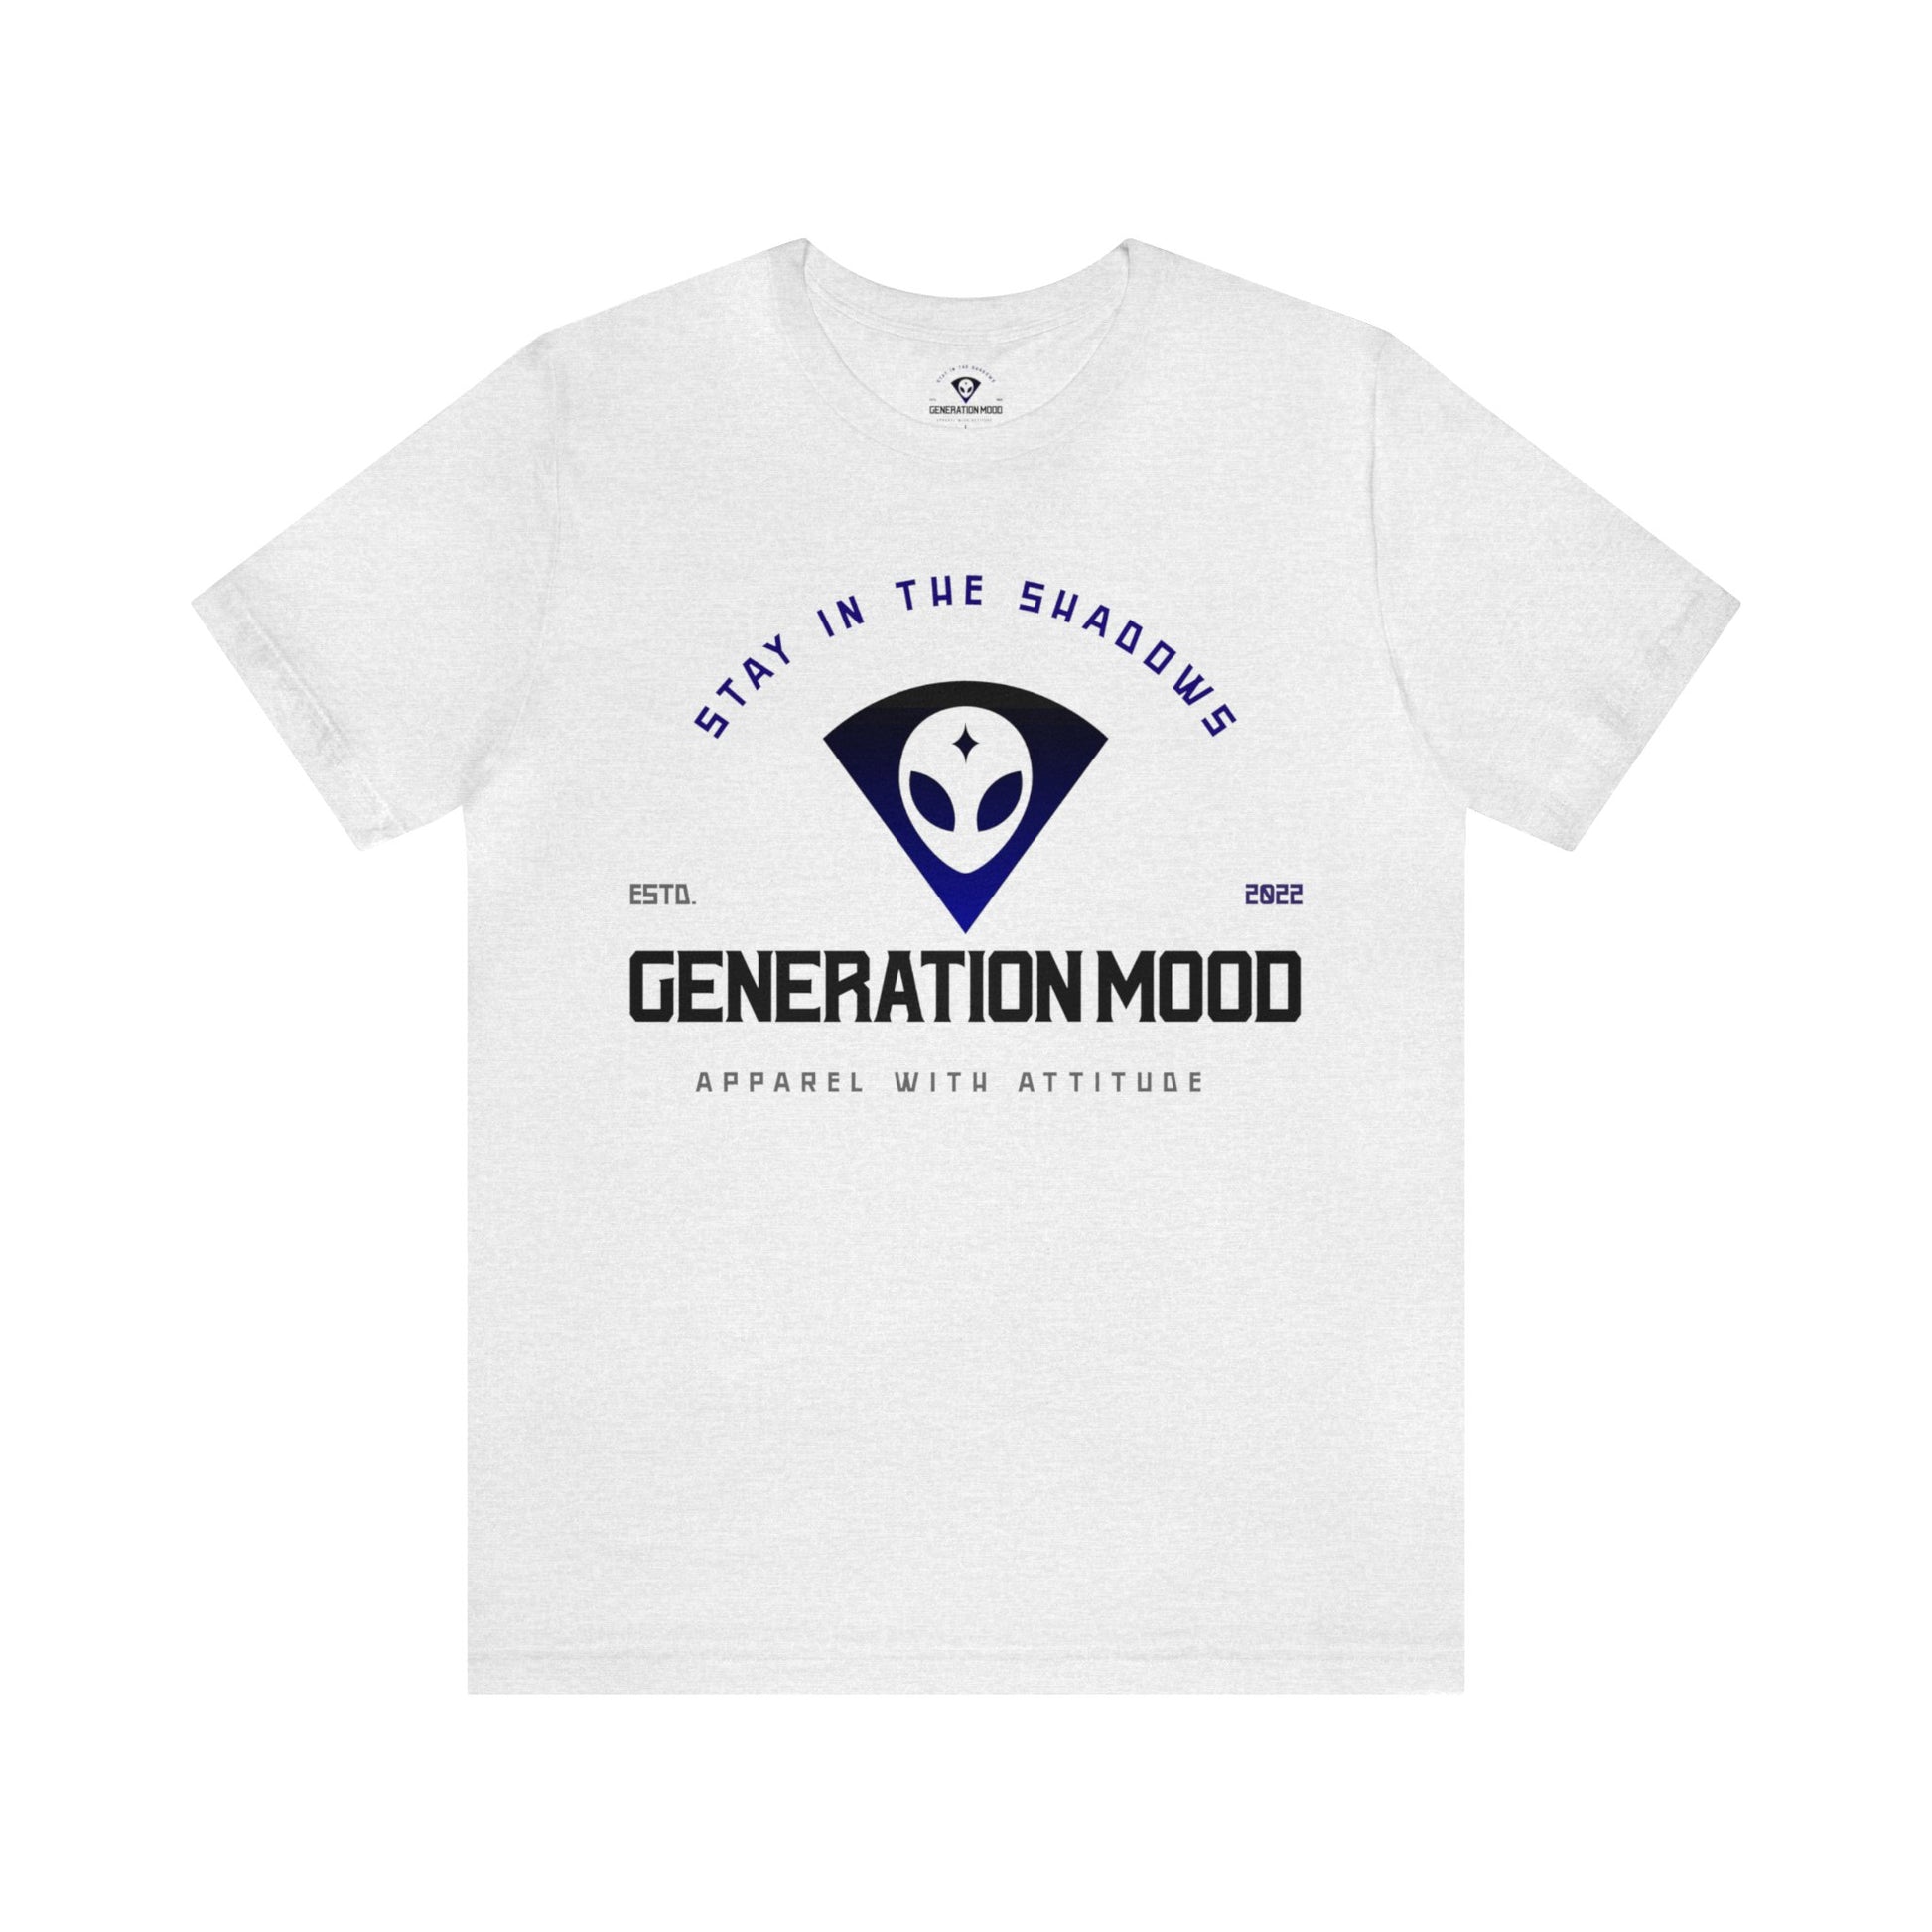 Are you ready to channel your inner cosmic wanderer? Our exclusive Generation Mood logo alien t-shirt combines nostalgia and a dash of intergalactic cool. Whether you are a believer in little beings or just love a good logo tee, this shirt is for you.